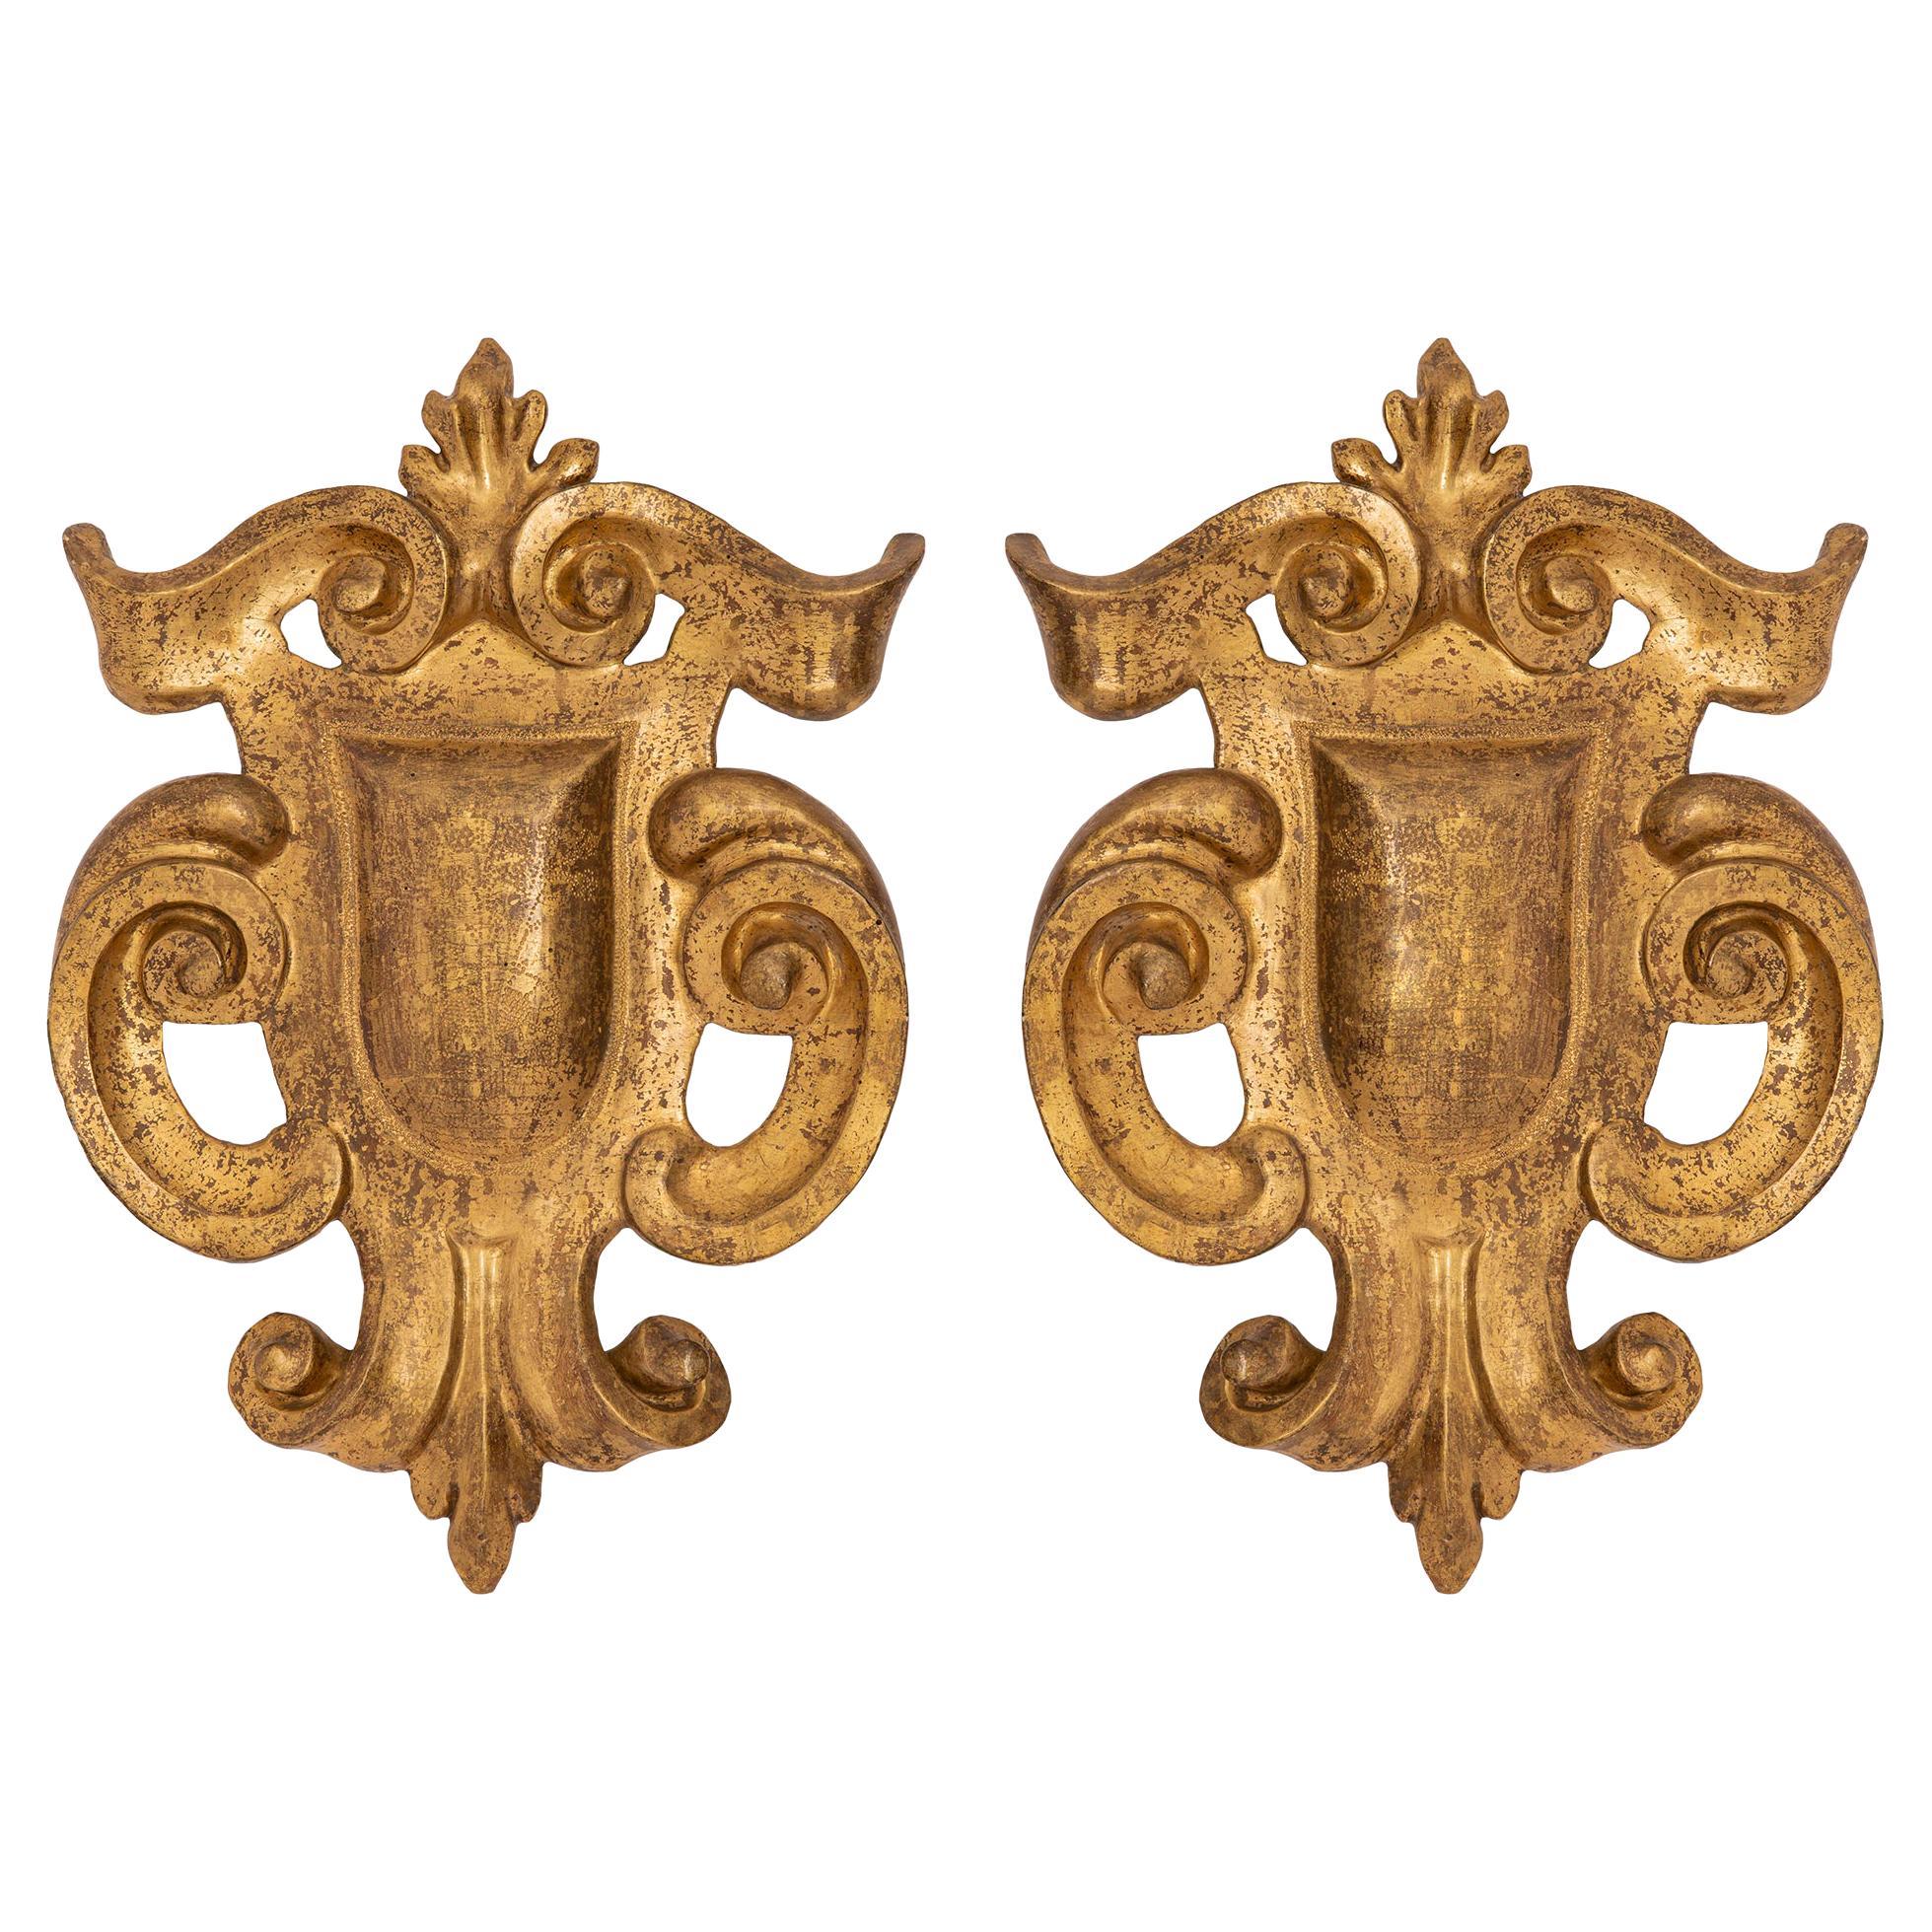 Pair of Italian 18th Century Baroque Carved Mecca Decorative Wall Decor For Sale